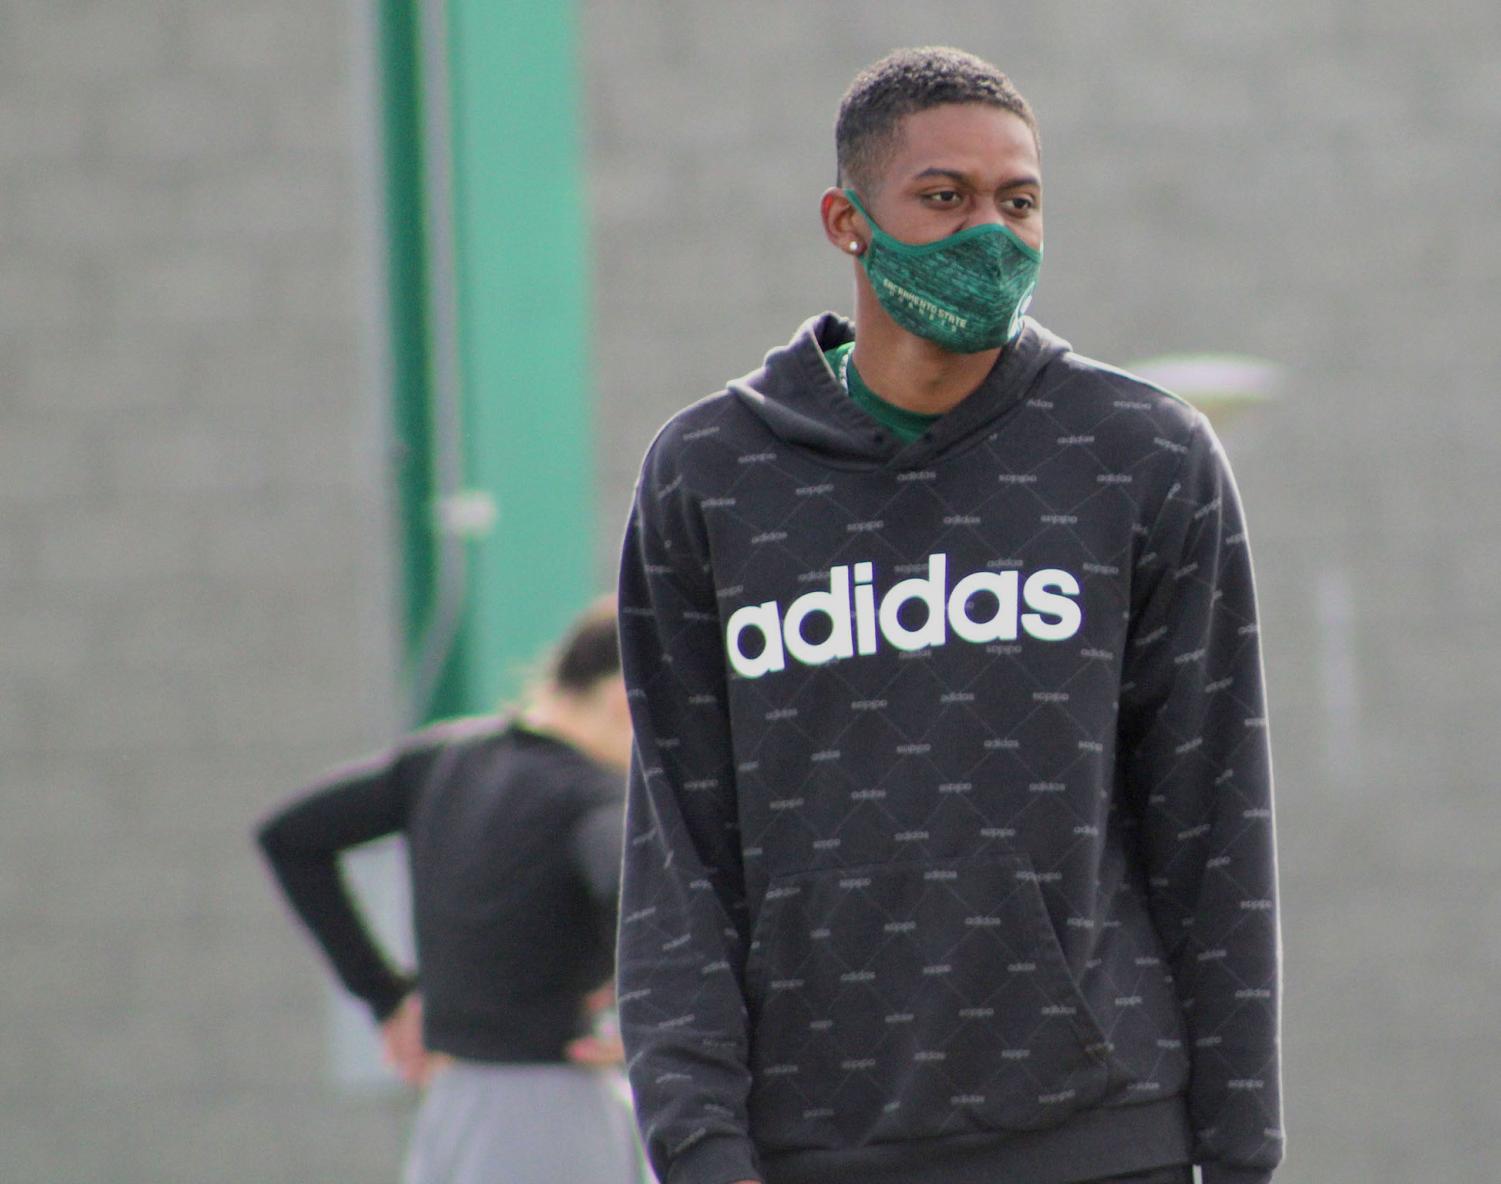 Sacramento State’s Jabari Reynolds II walks back to drill following 10x10 100-meter warm-up on the track at Sac State on Thursday, Feb. 18, 2021. Jabari has the fifth fastest 200-meter time in Sac State history at 21.81 seconds in 2020. 